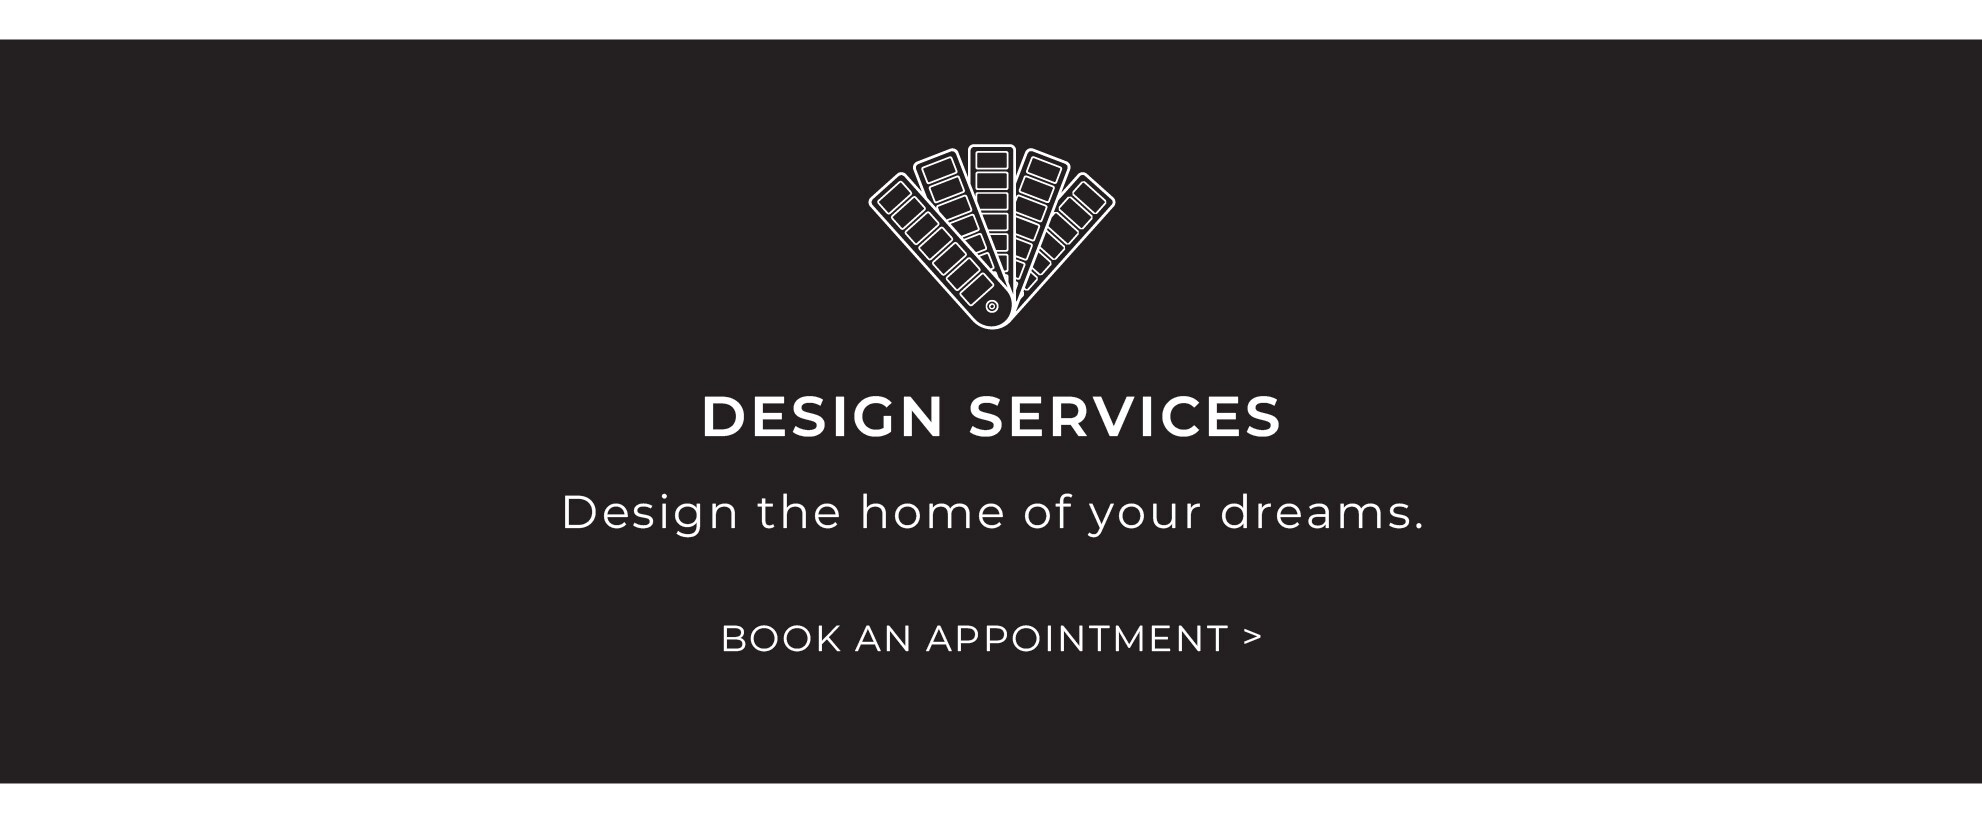 Schedule a design appointment.